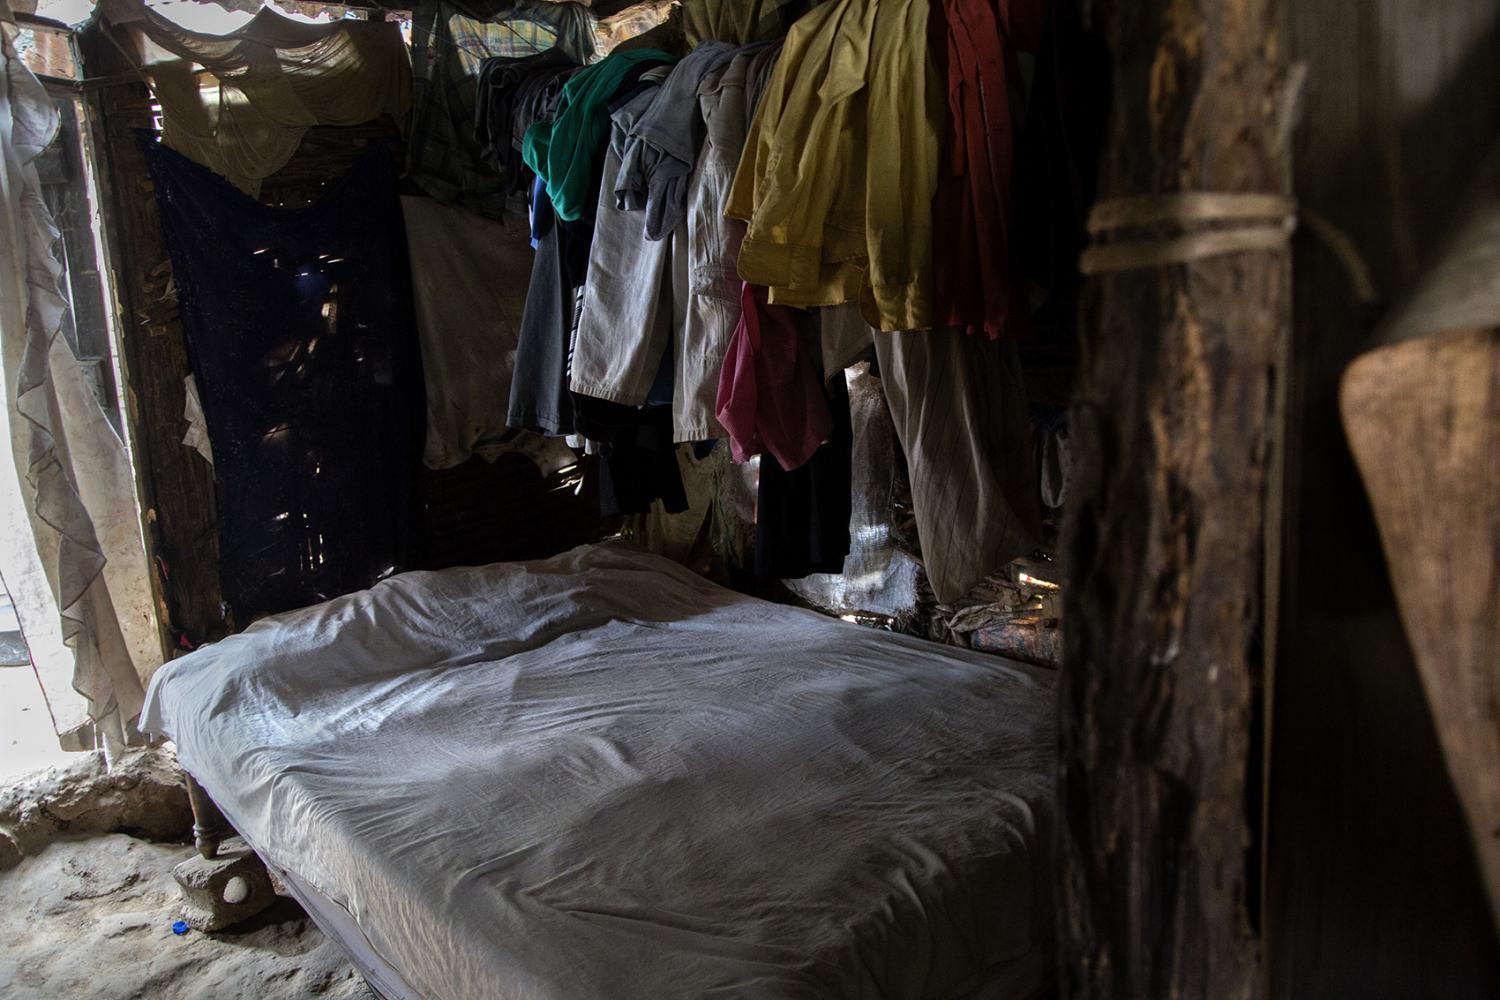 Clothing hangs from the ceiling in this 1 room house to keep it from getting ruined or lost when it rains. With no foundation the water rushes through most homes when the hurricanes hit.  A family of 5 lives in this room in Milot, Haiti.